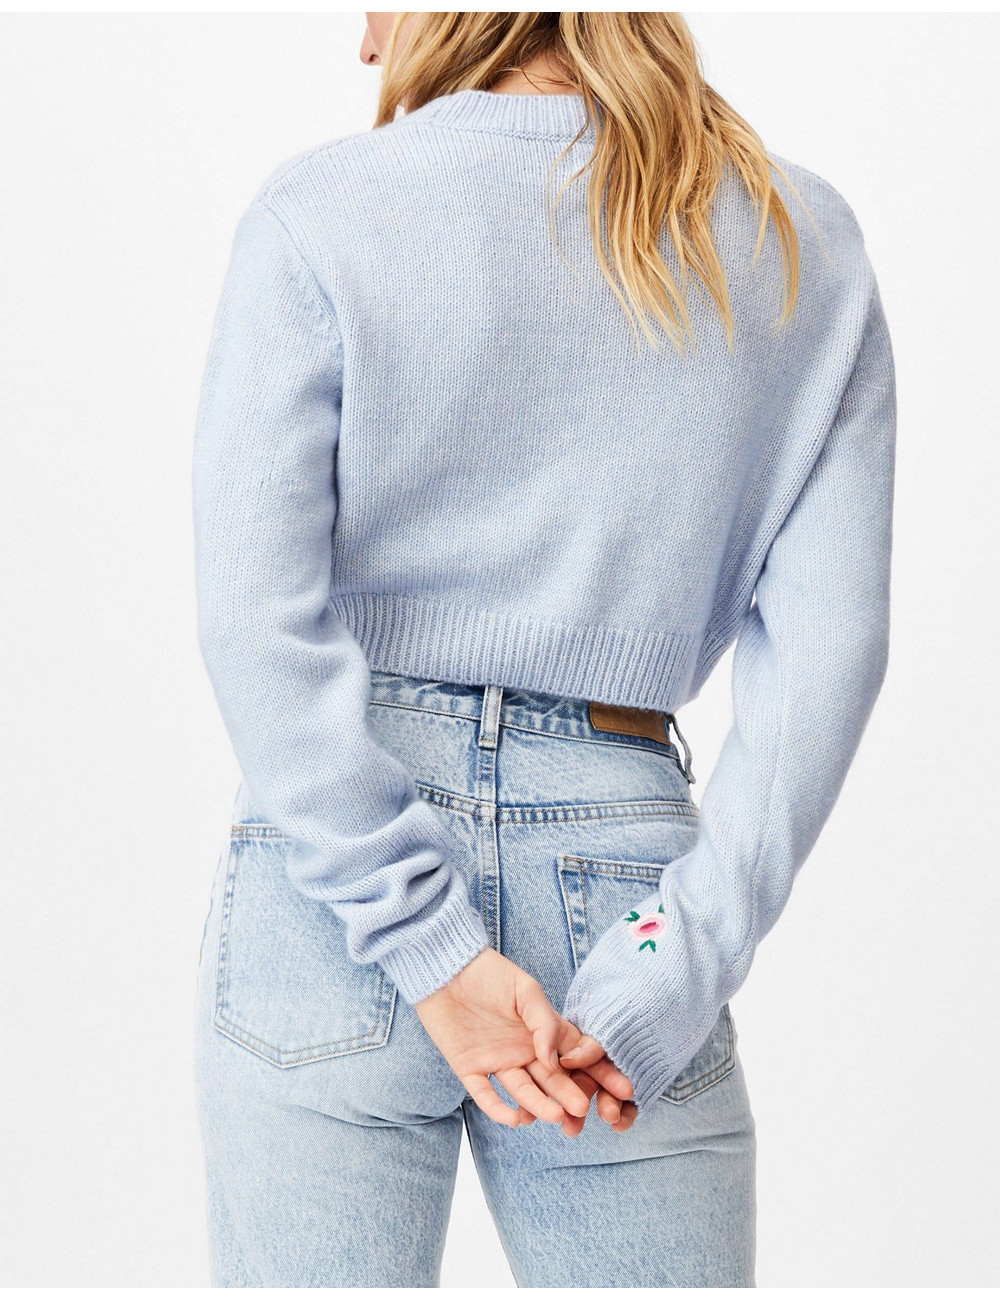 Cotton:On embroidered knit...